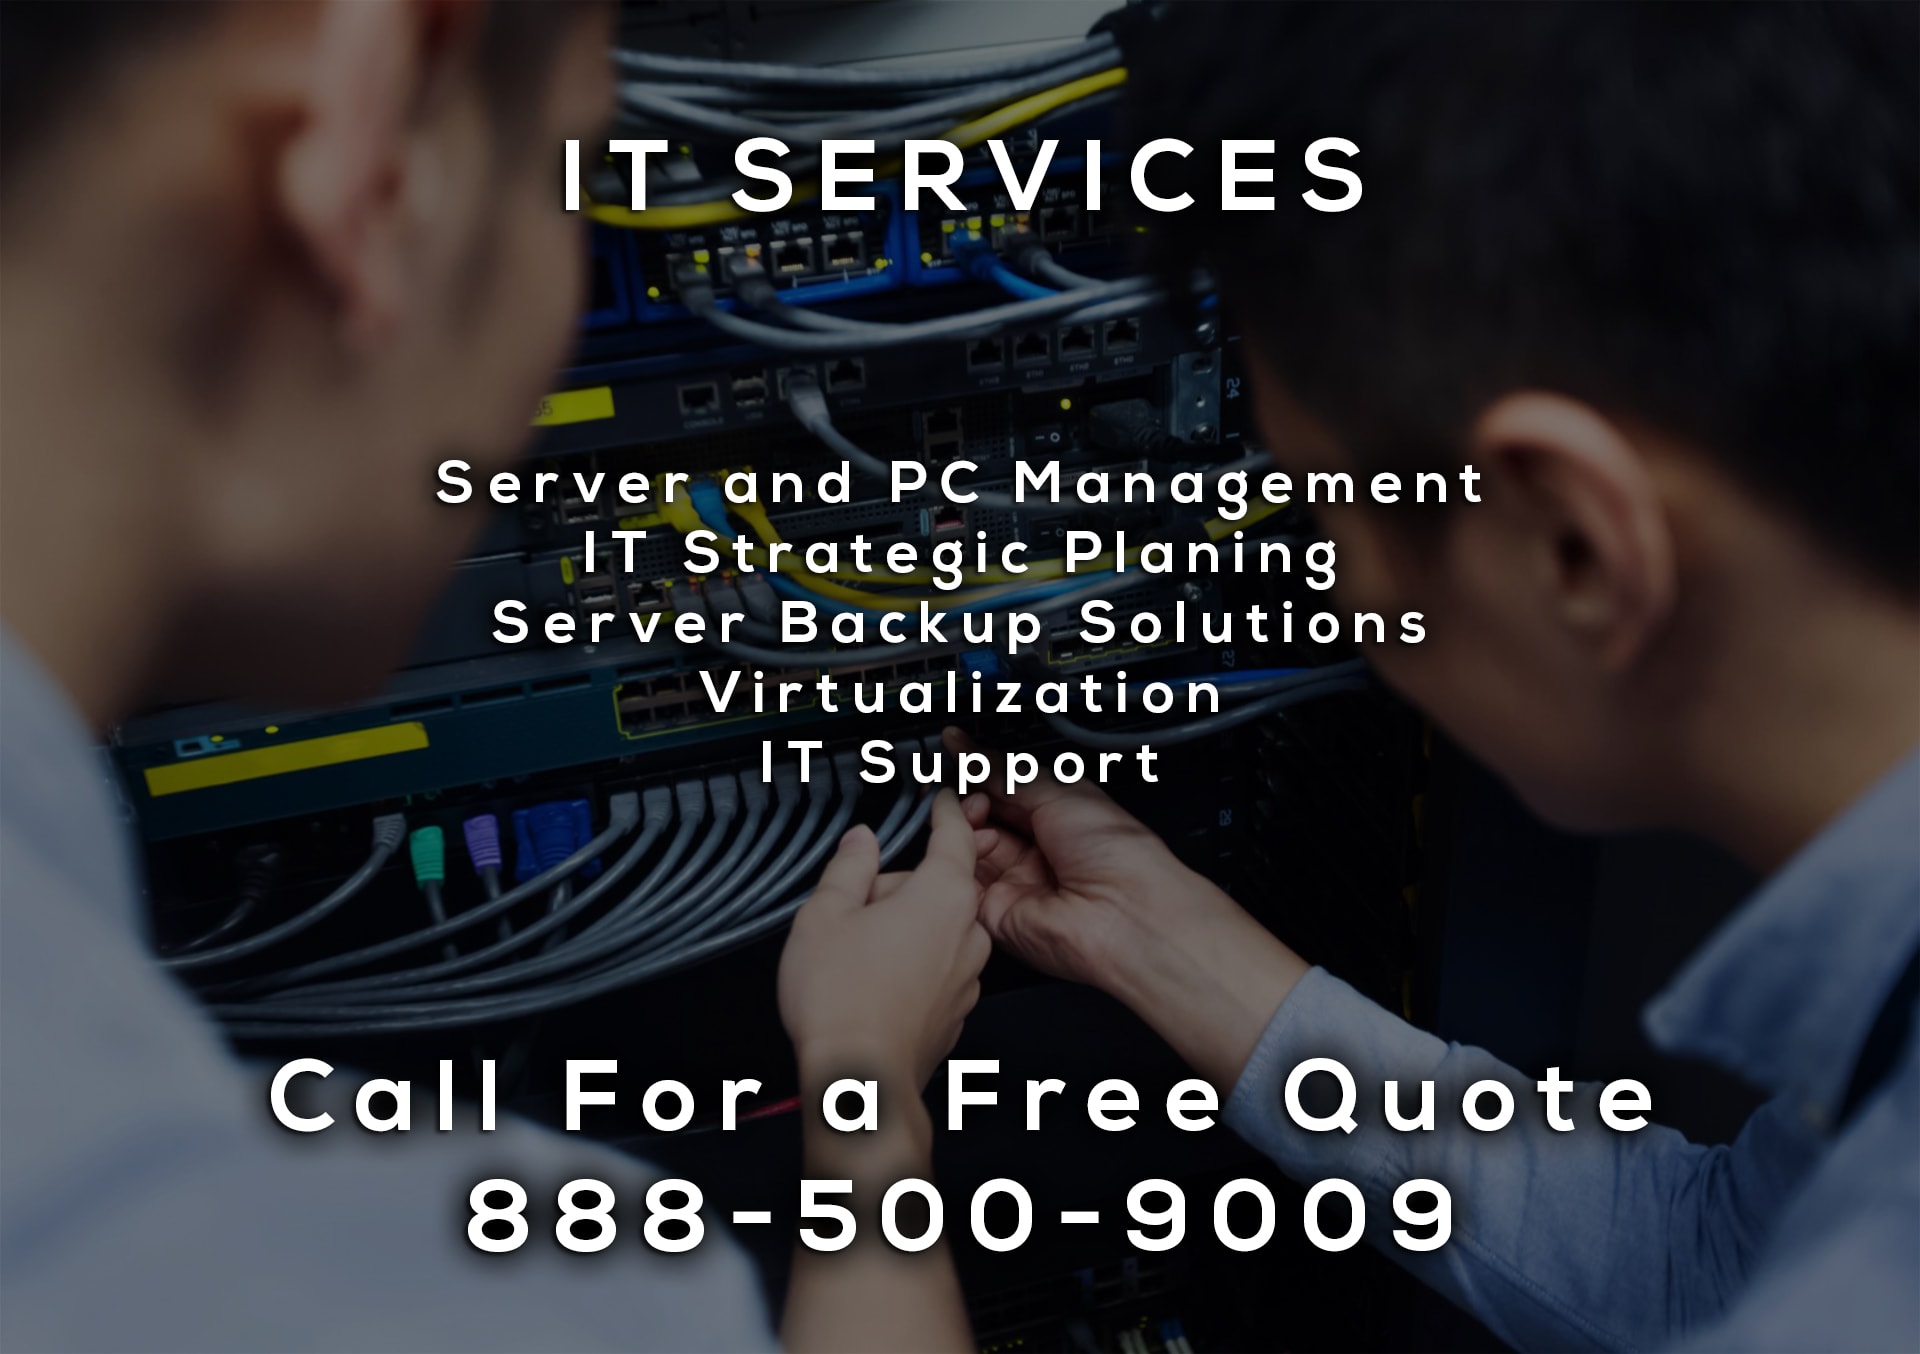 IT Services in Rialto CA - Managed IT Services